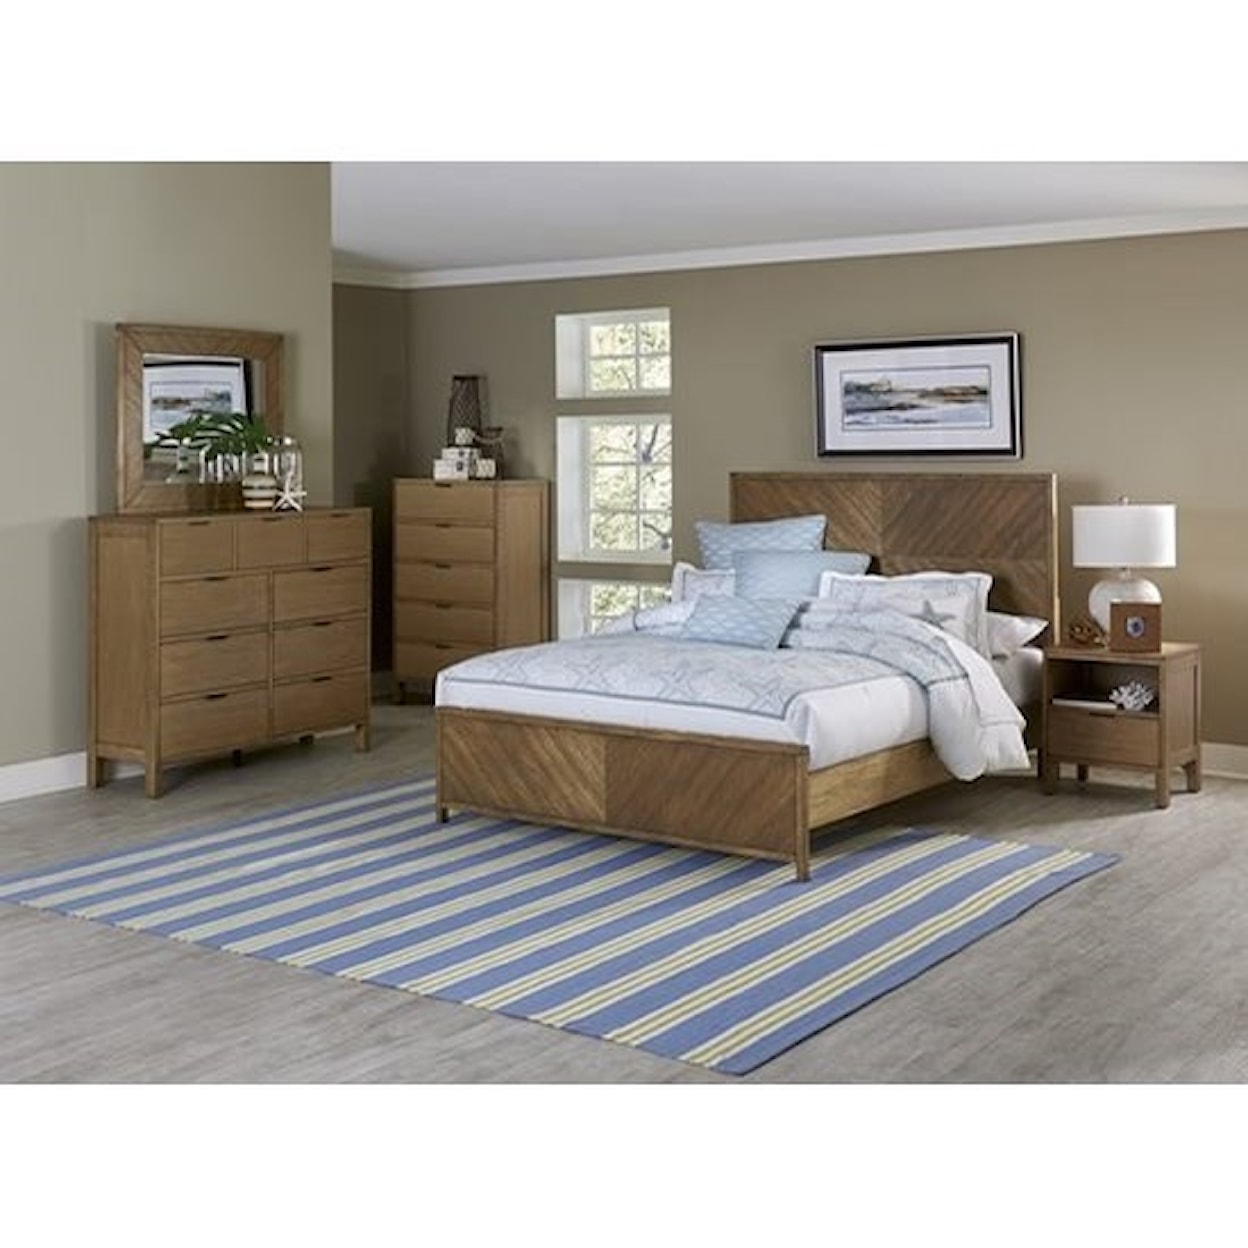 Carolina Chairs Strategy Queen Bed